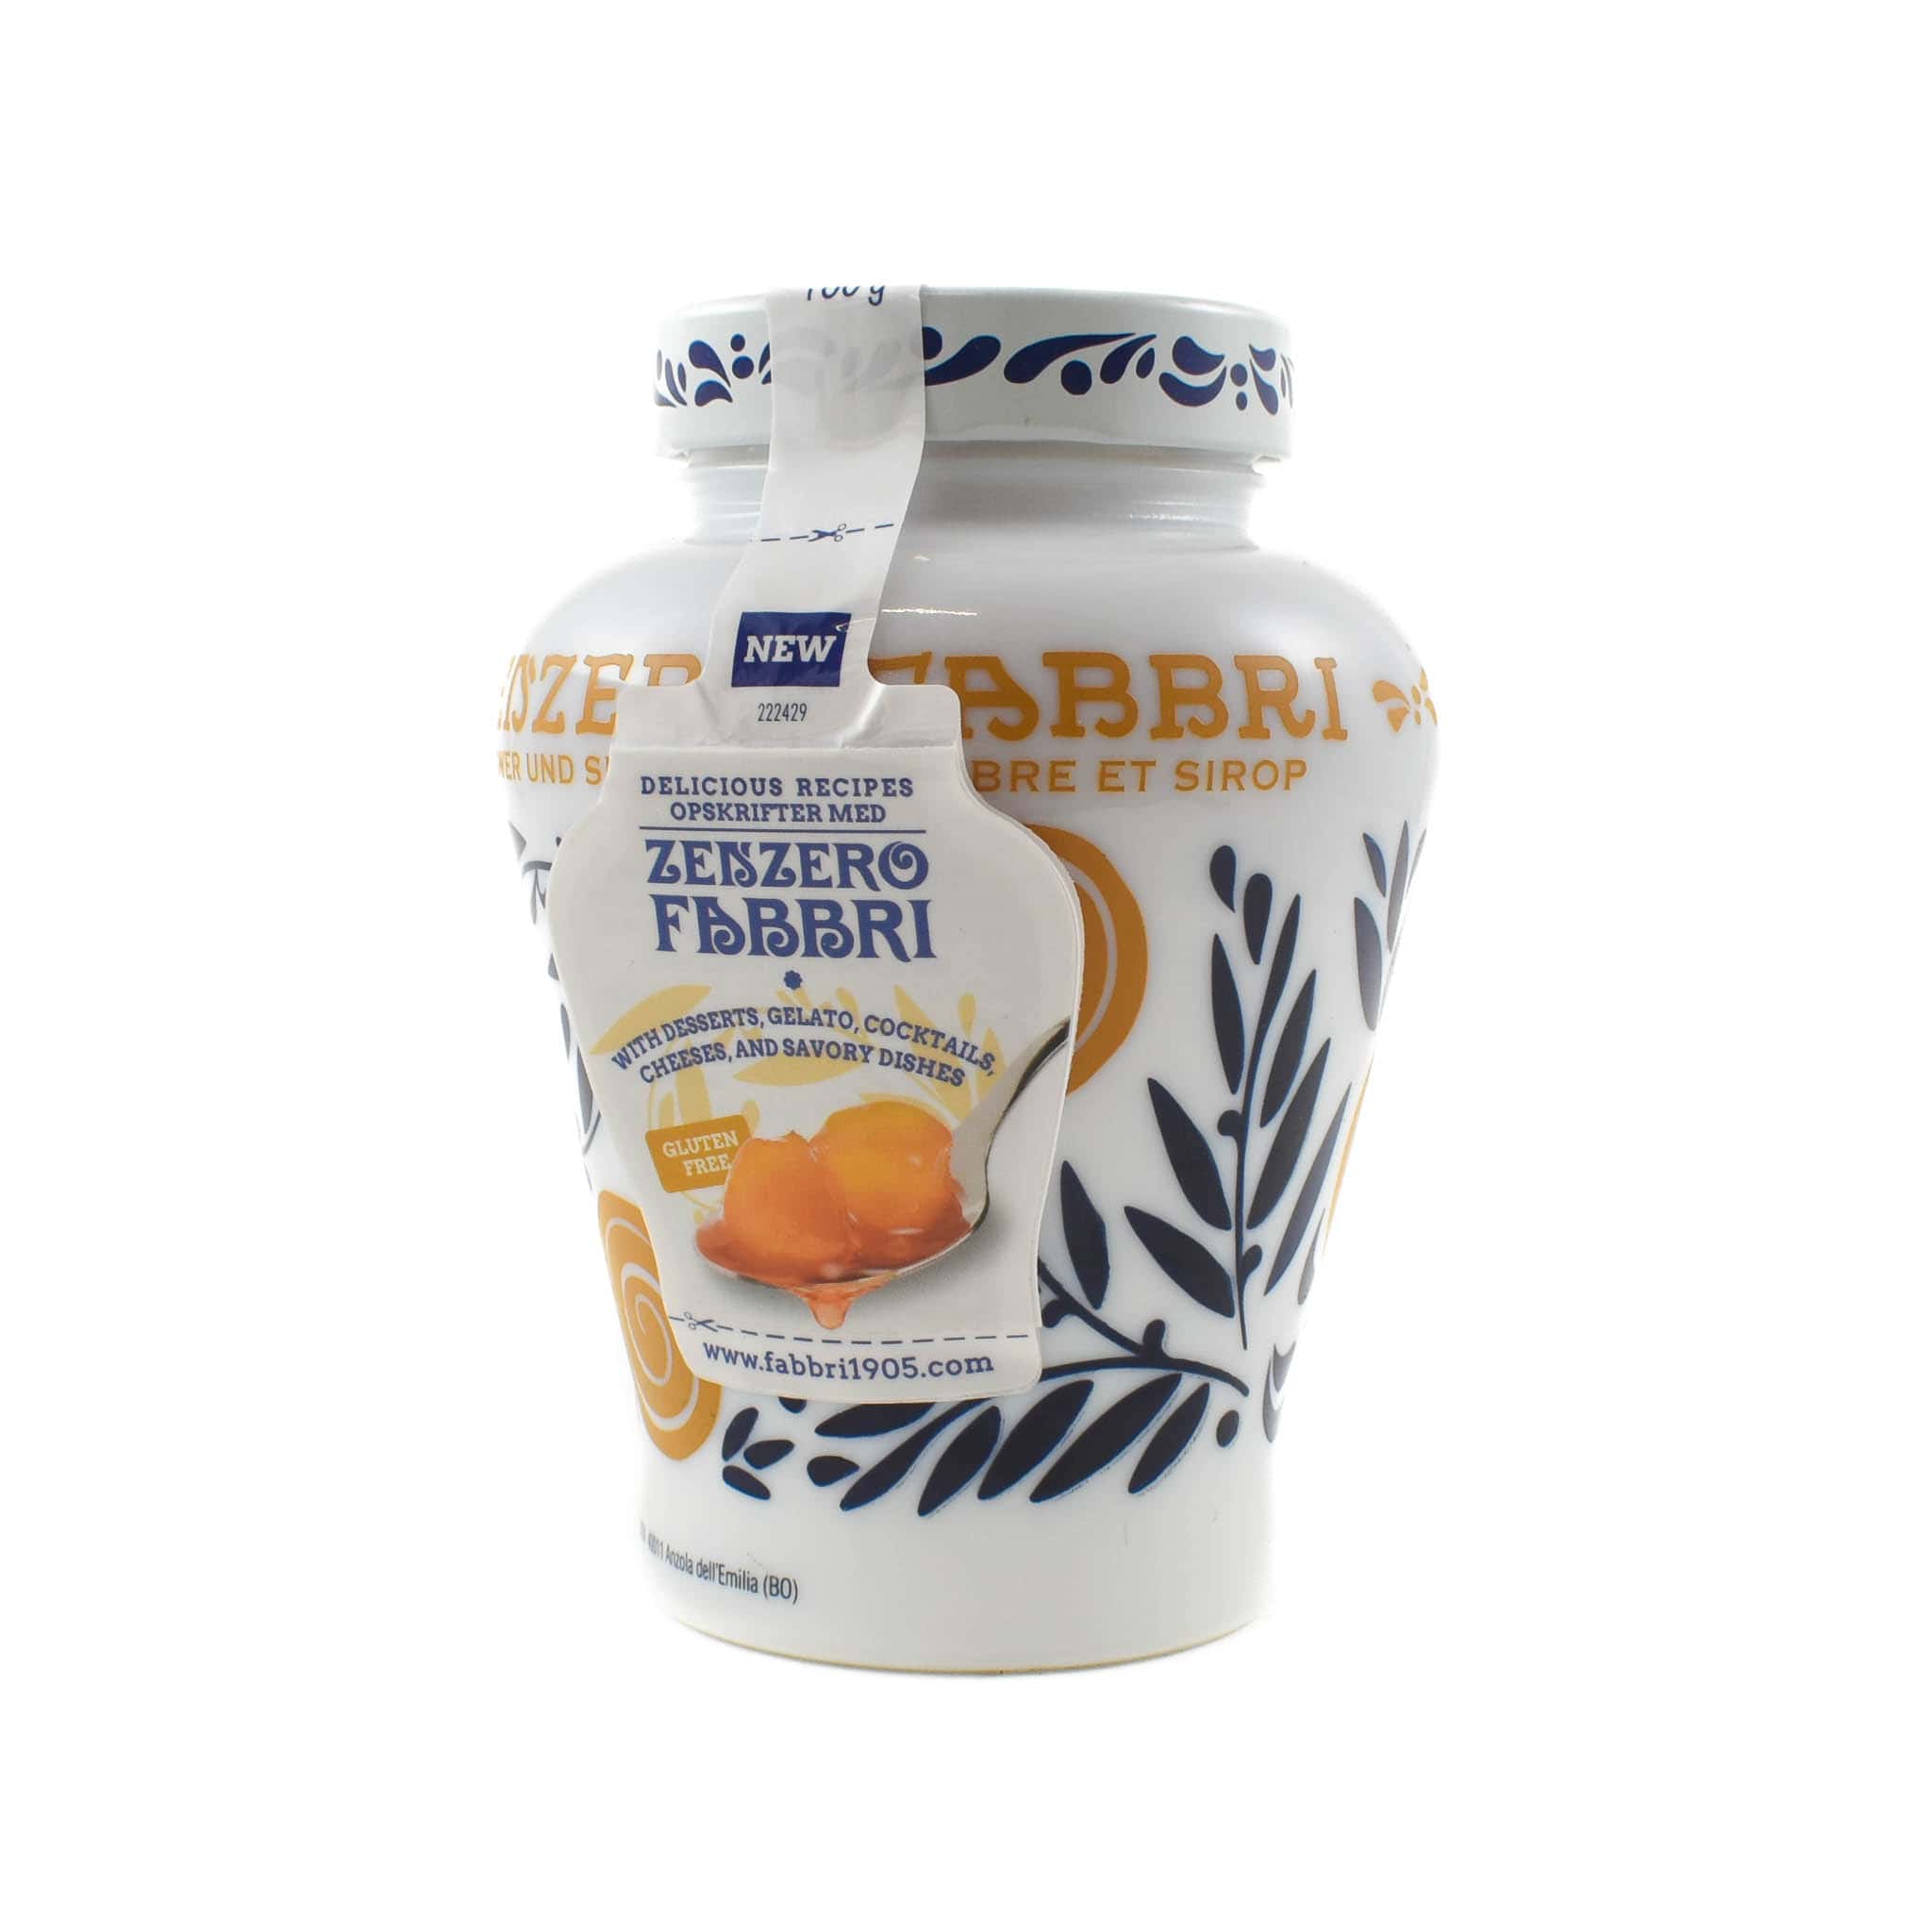 Fabbri Candied Ginger in Syrup, 600g